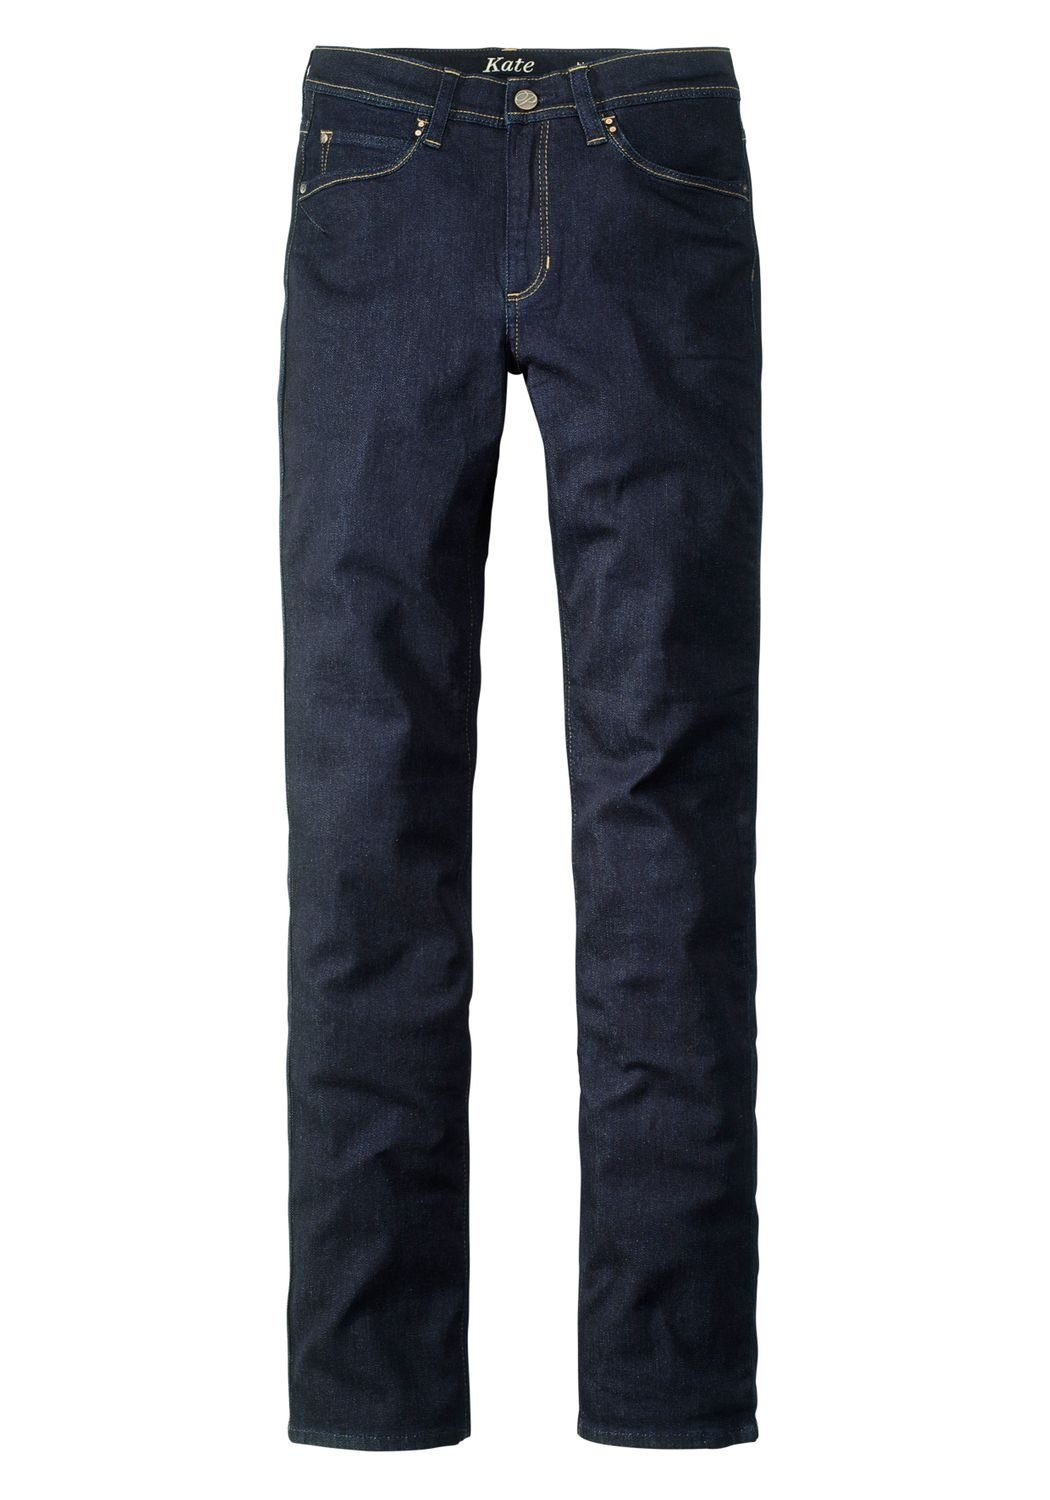 Paddock's Straight-Jeans Kate Jeanshose mit Stretch rinse washed